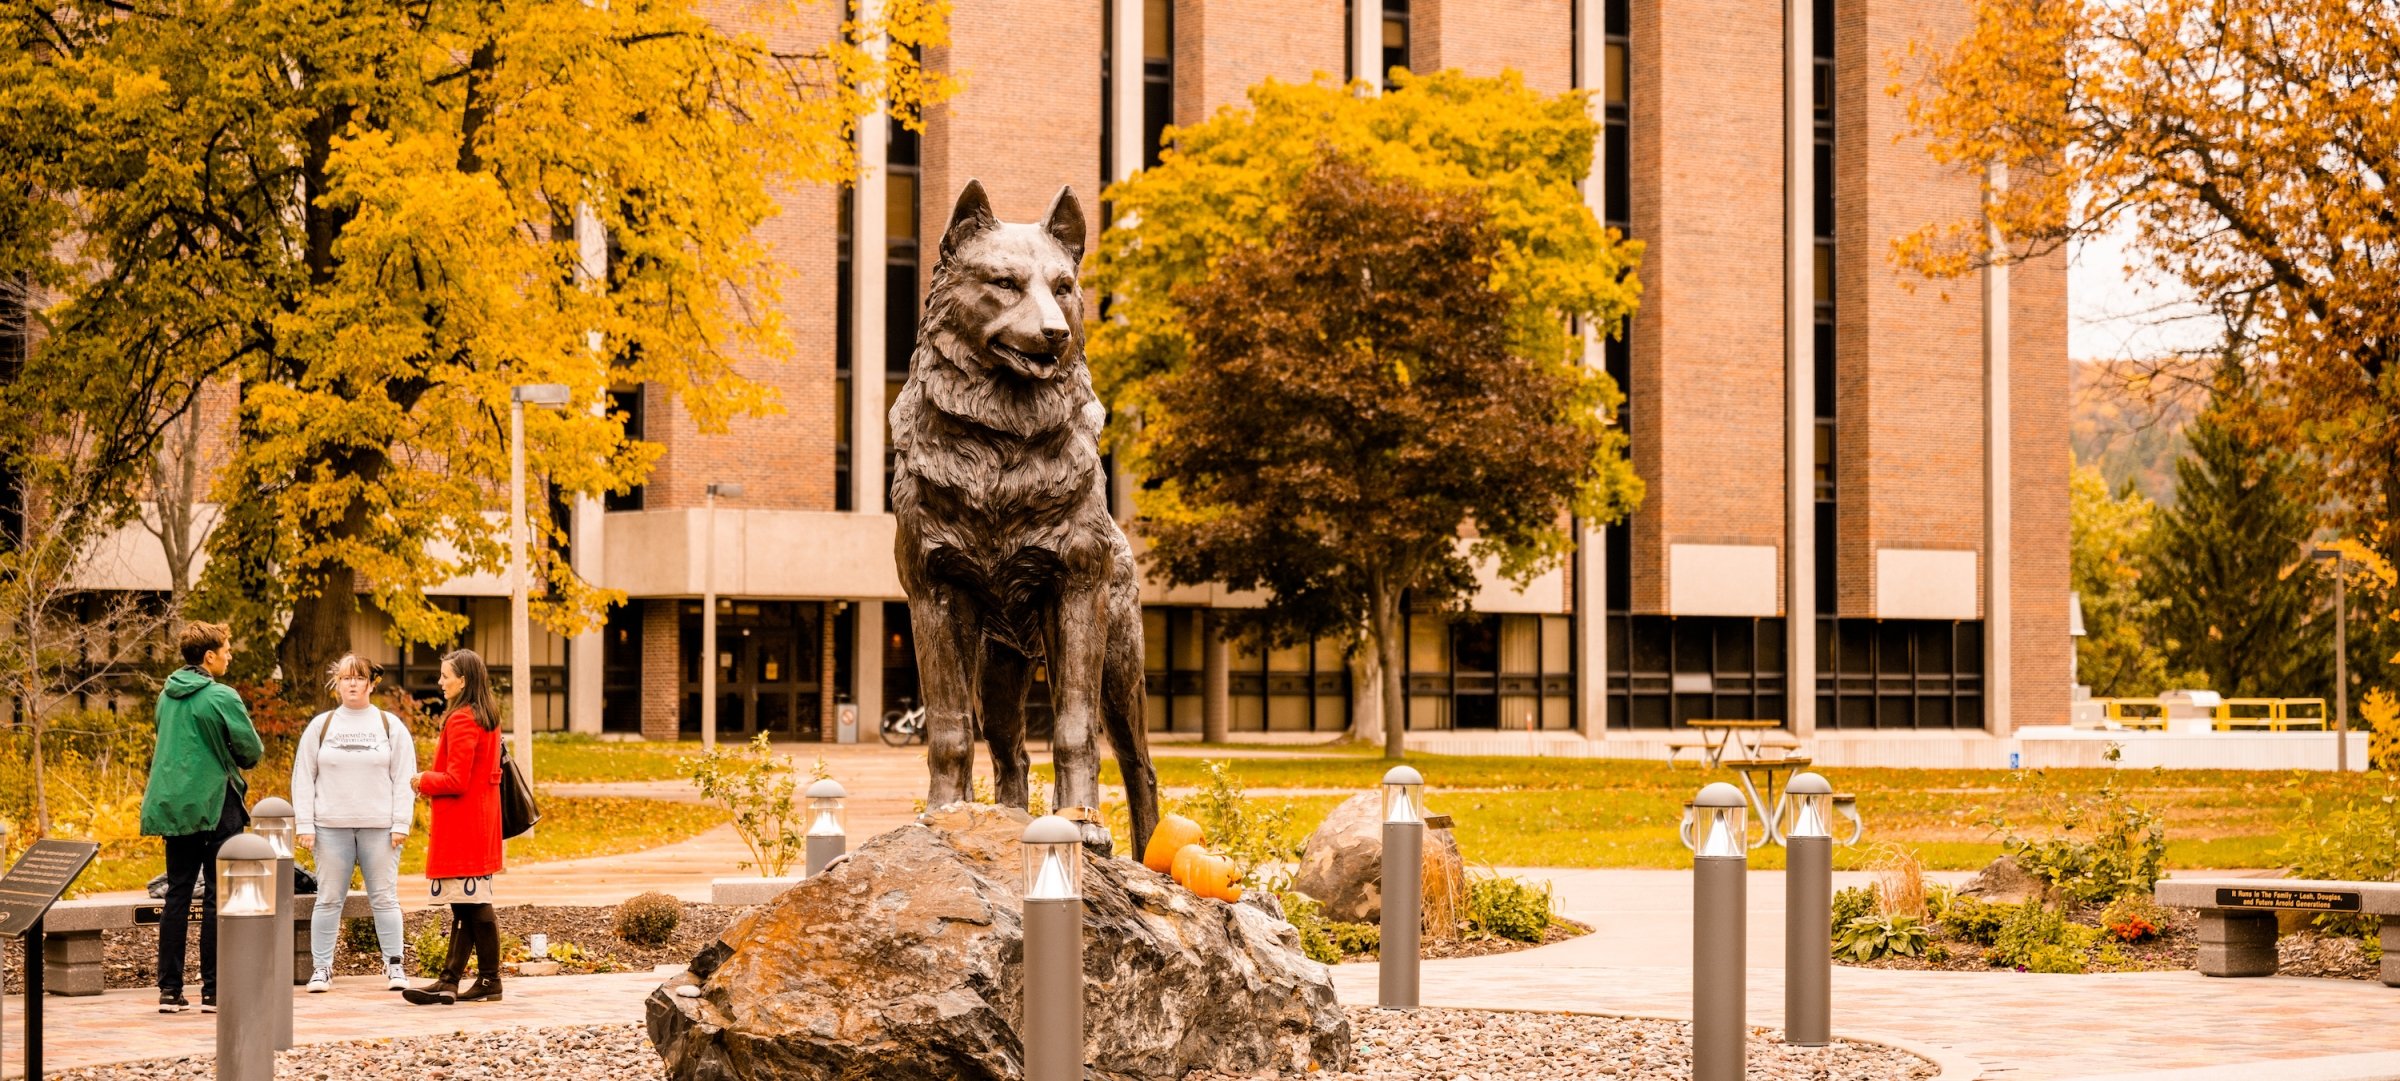 Students on campus near the Husky statue.